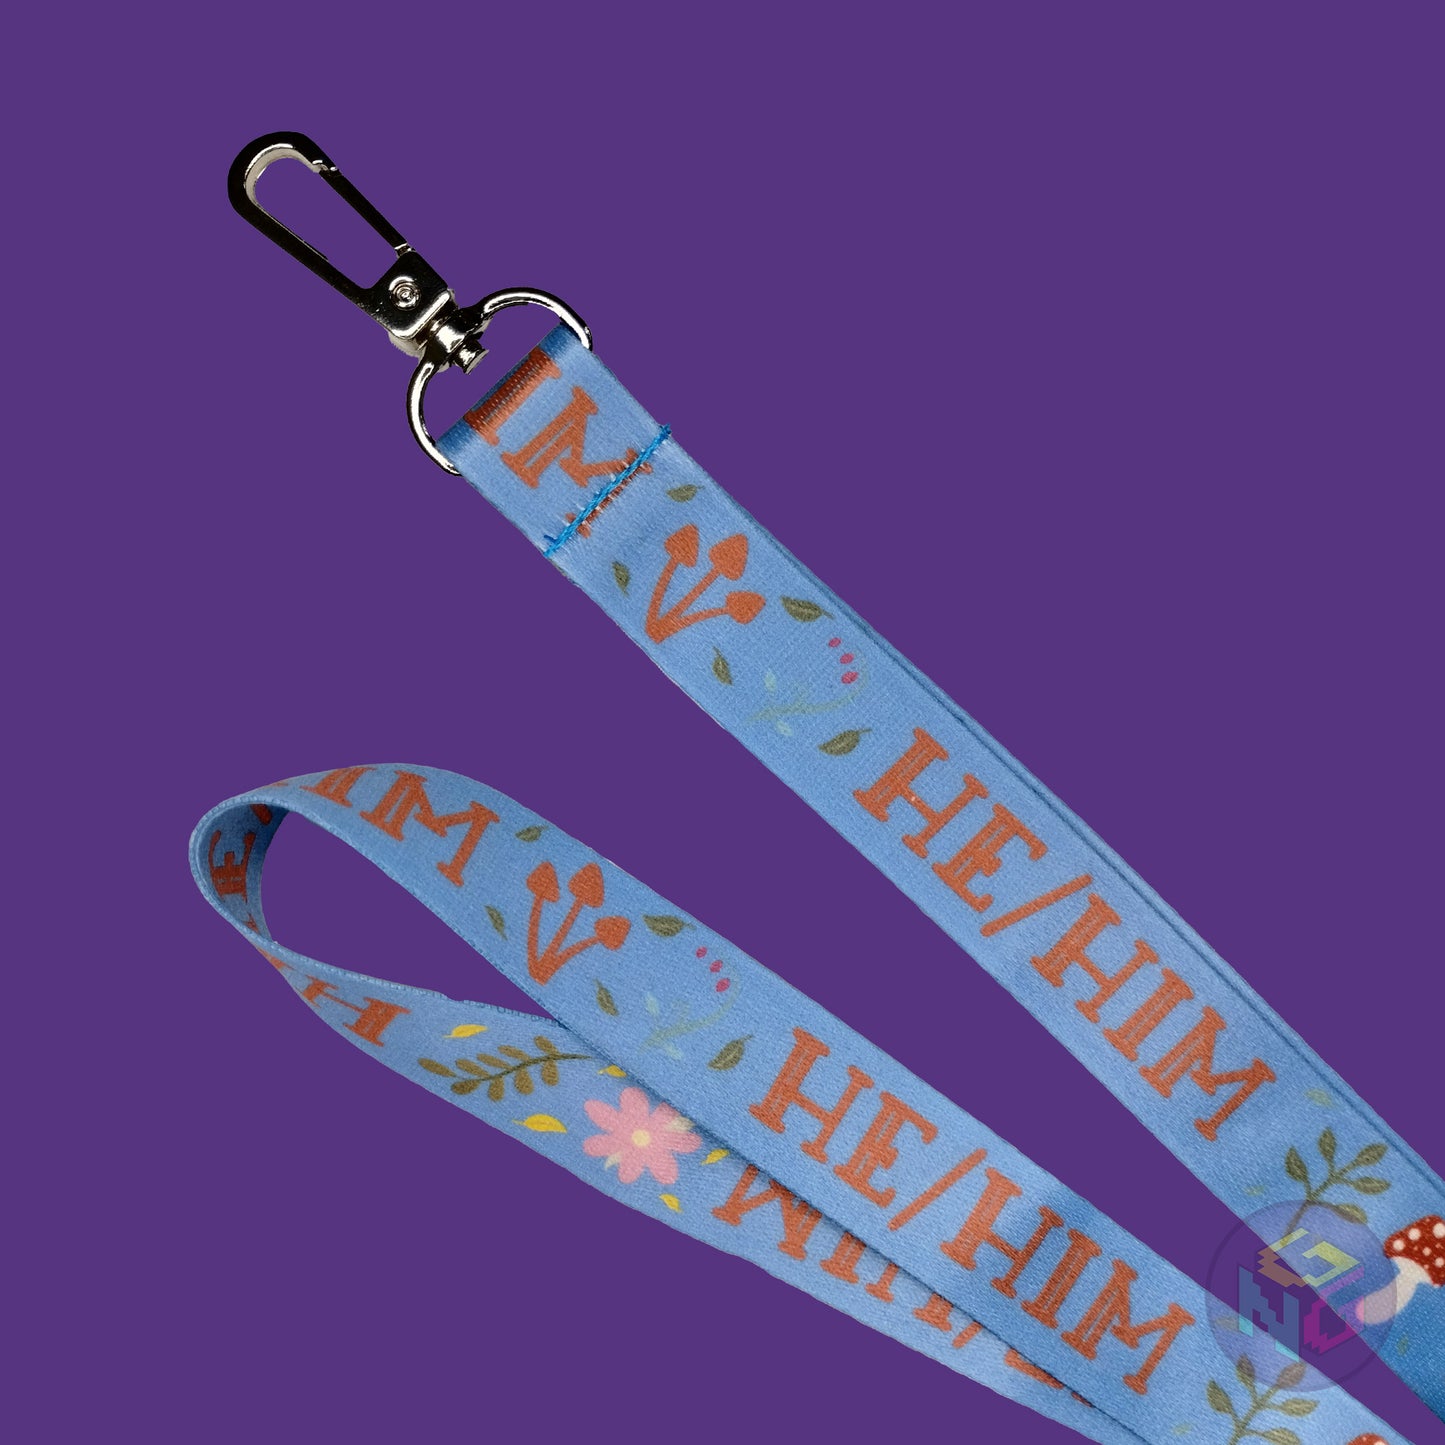 close up detail of the blue he him nature lanyard showing the lobster clasp, brown mushrooms, green leaves, and all caps text